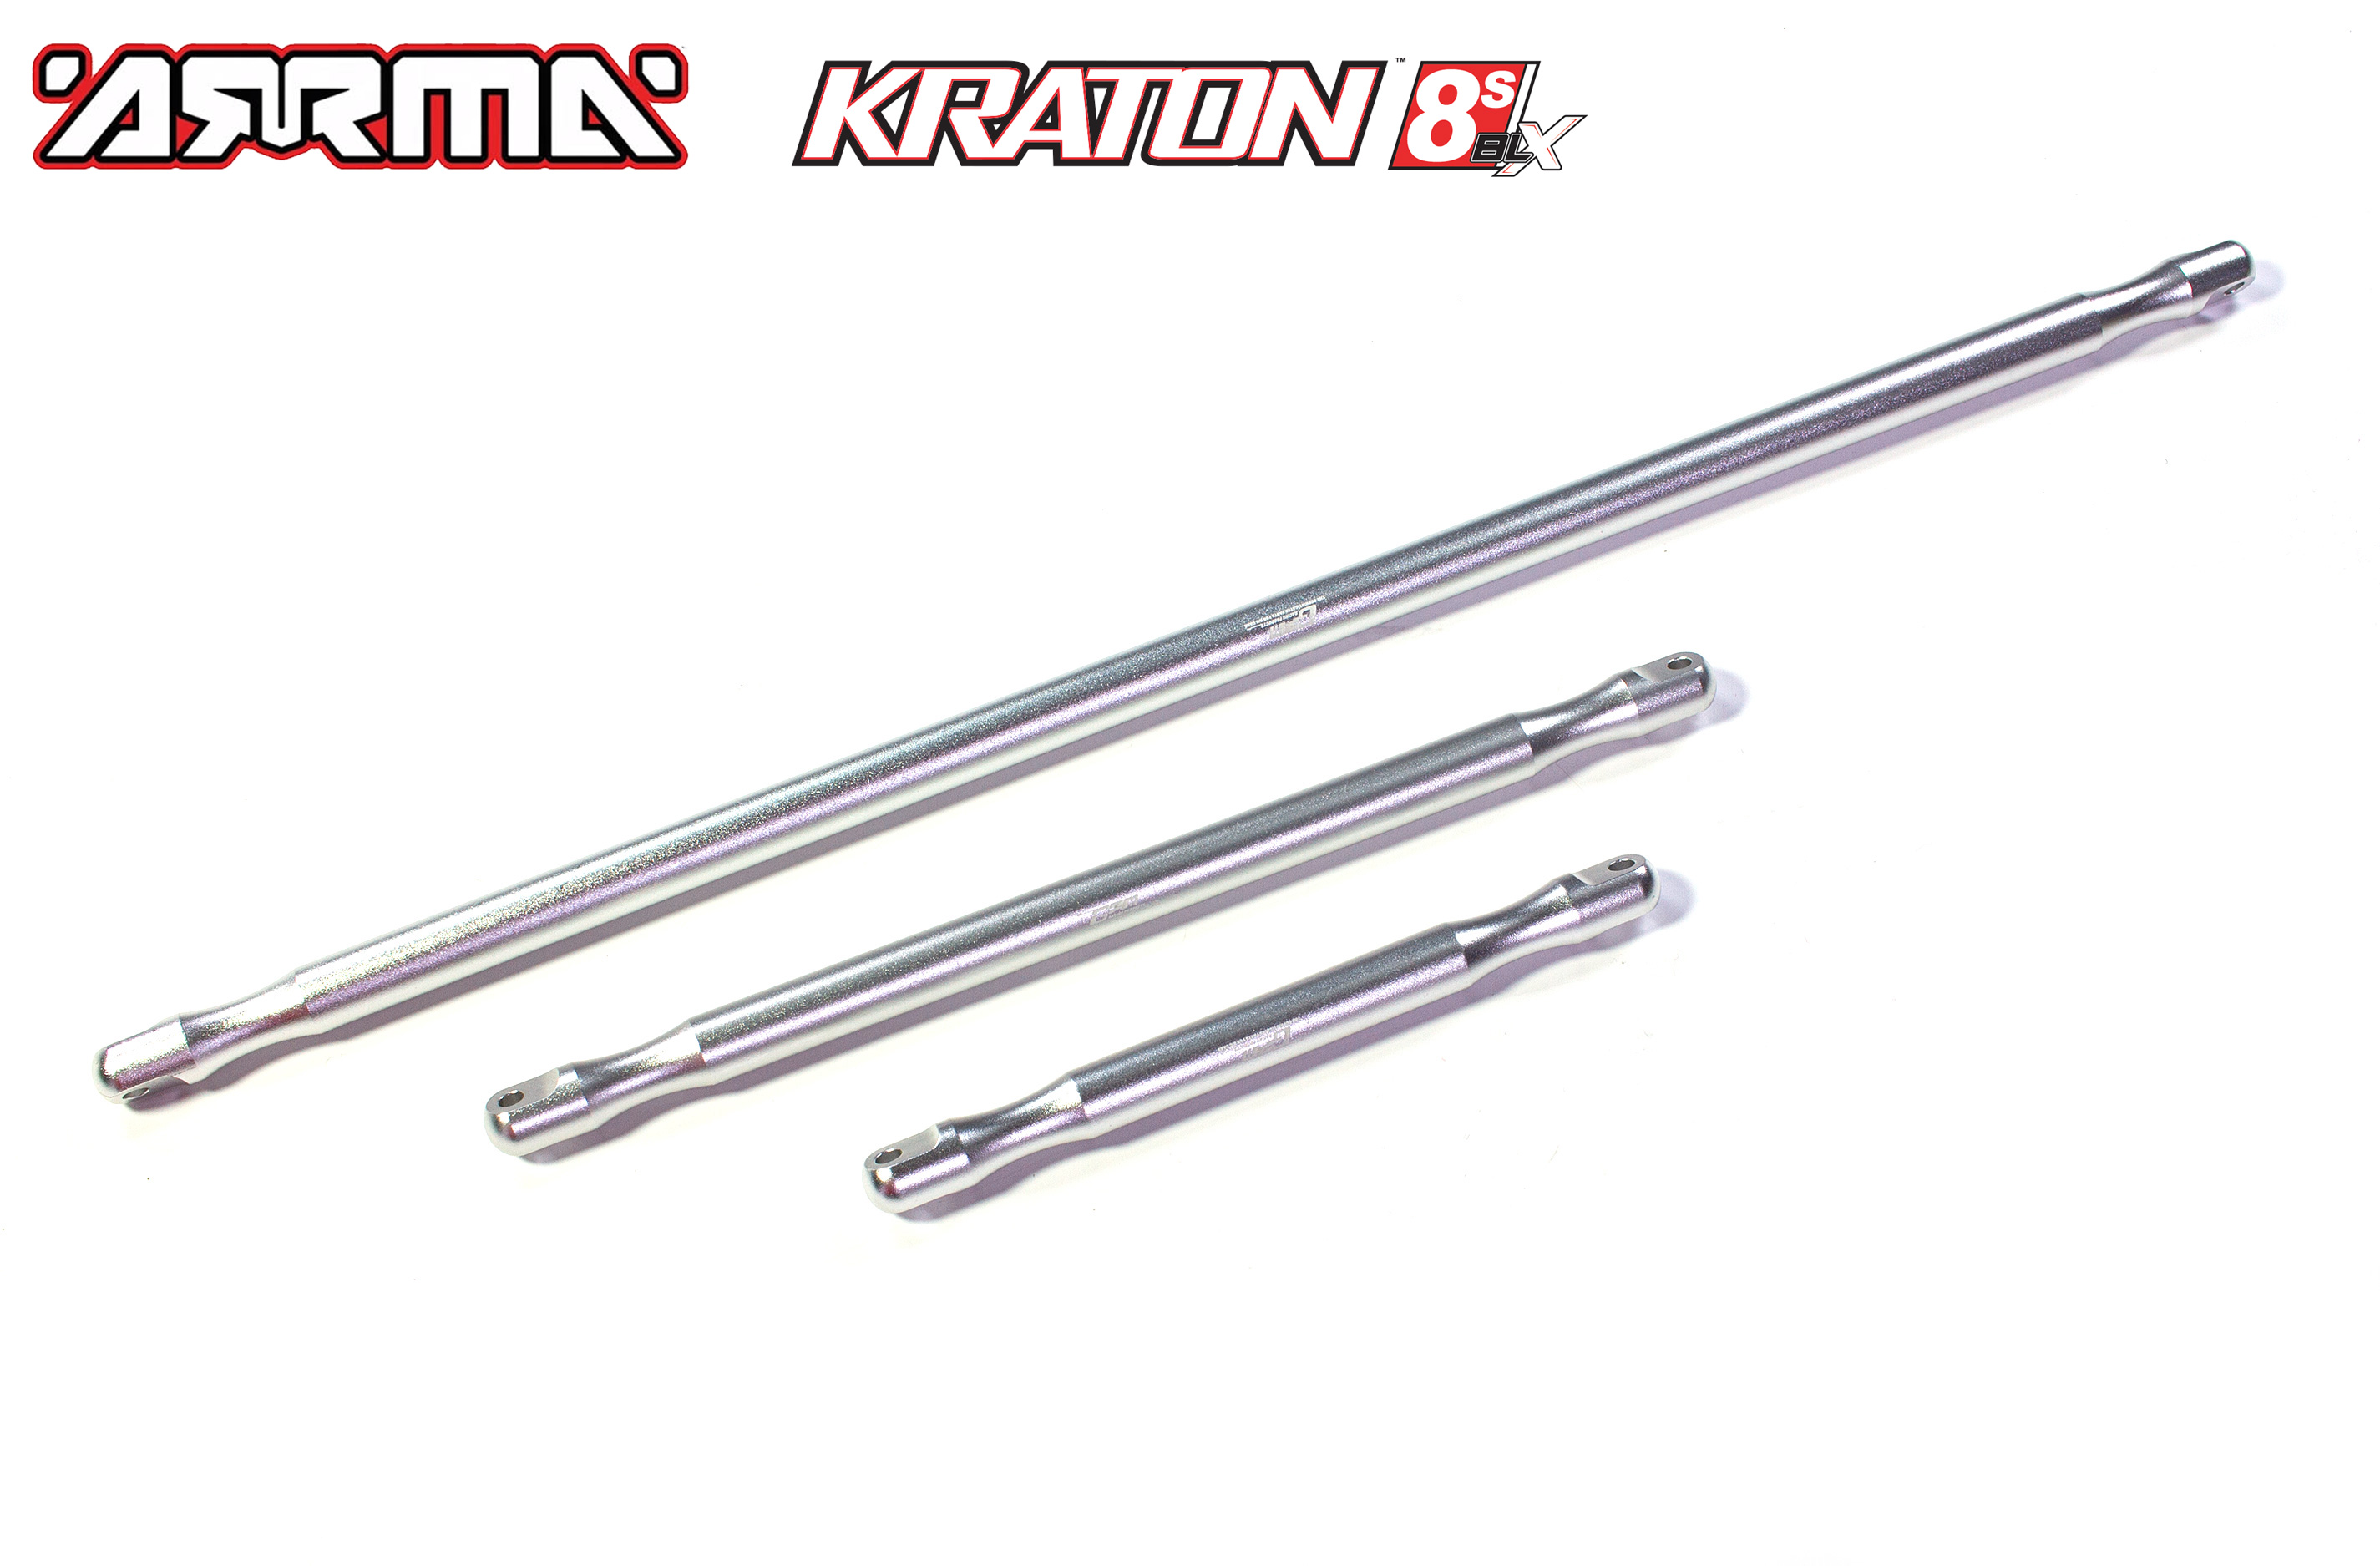 AKX025 GPM chassis struts for Arrma Kraton 8S Vers.1